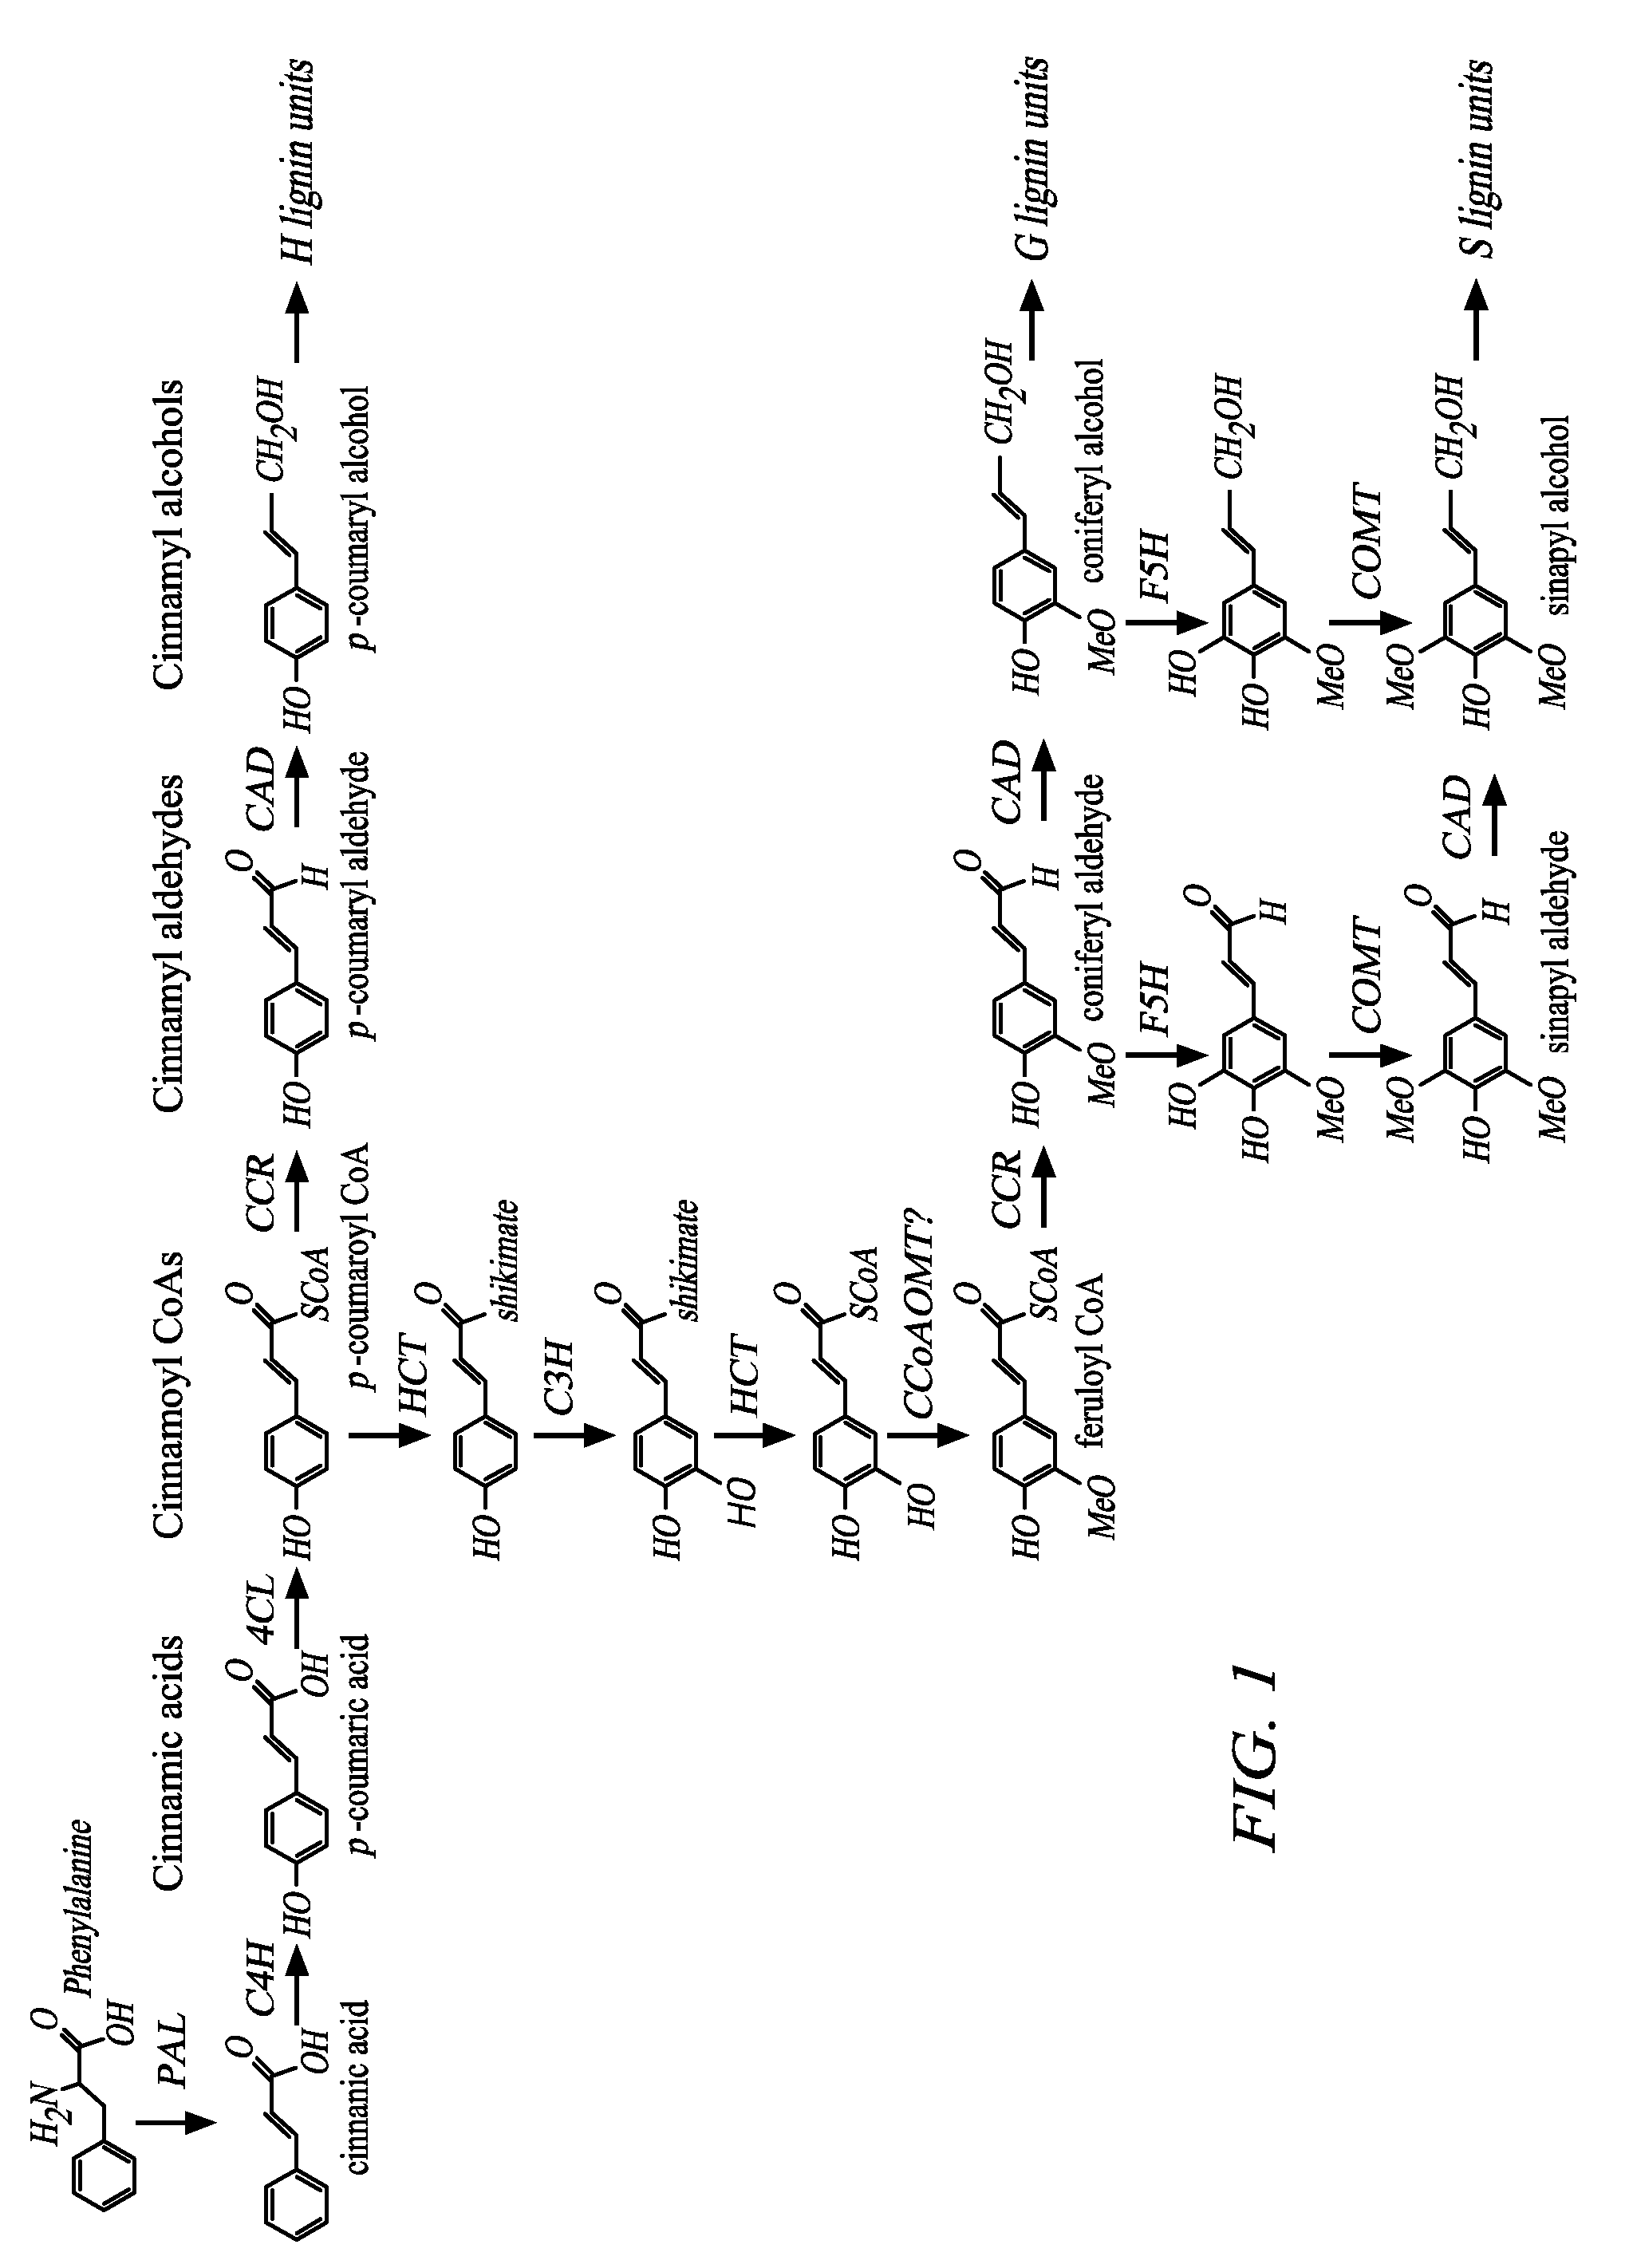 Biofuel production methods and compositions